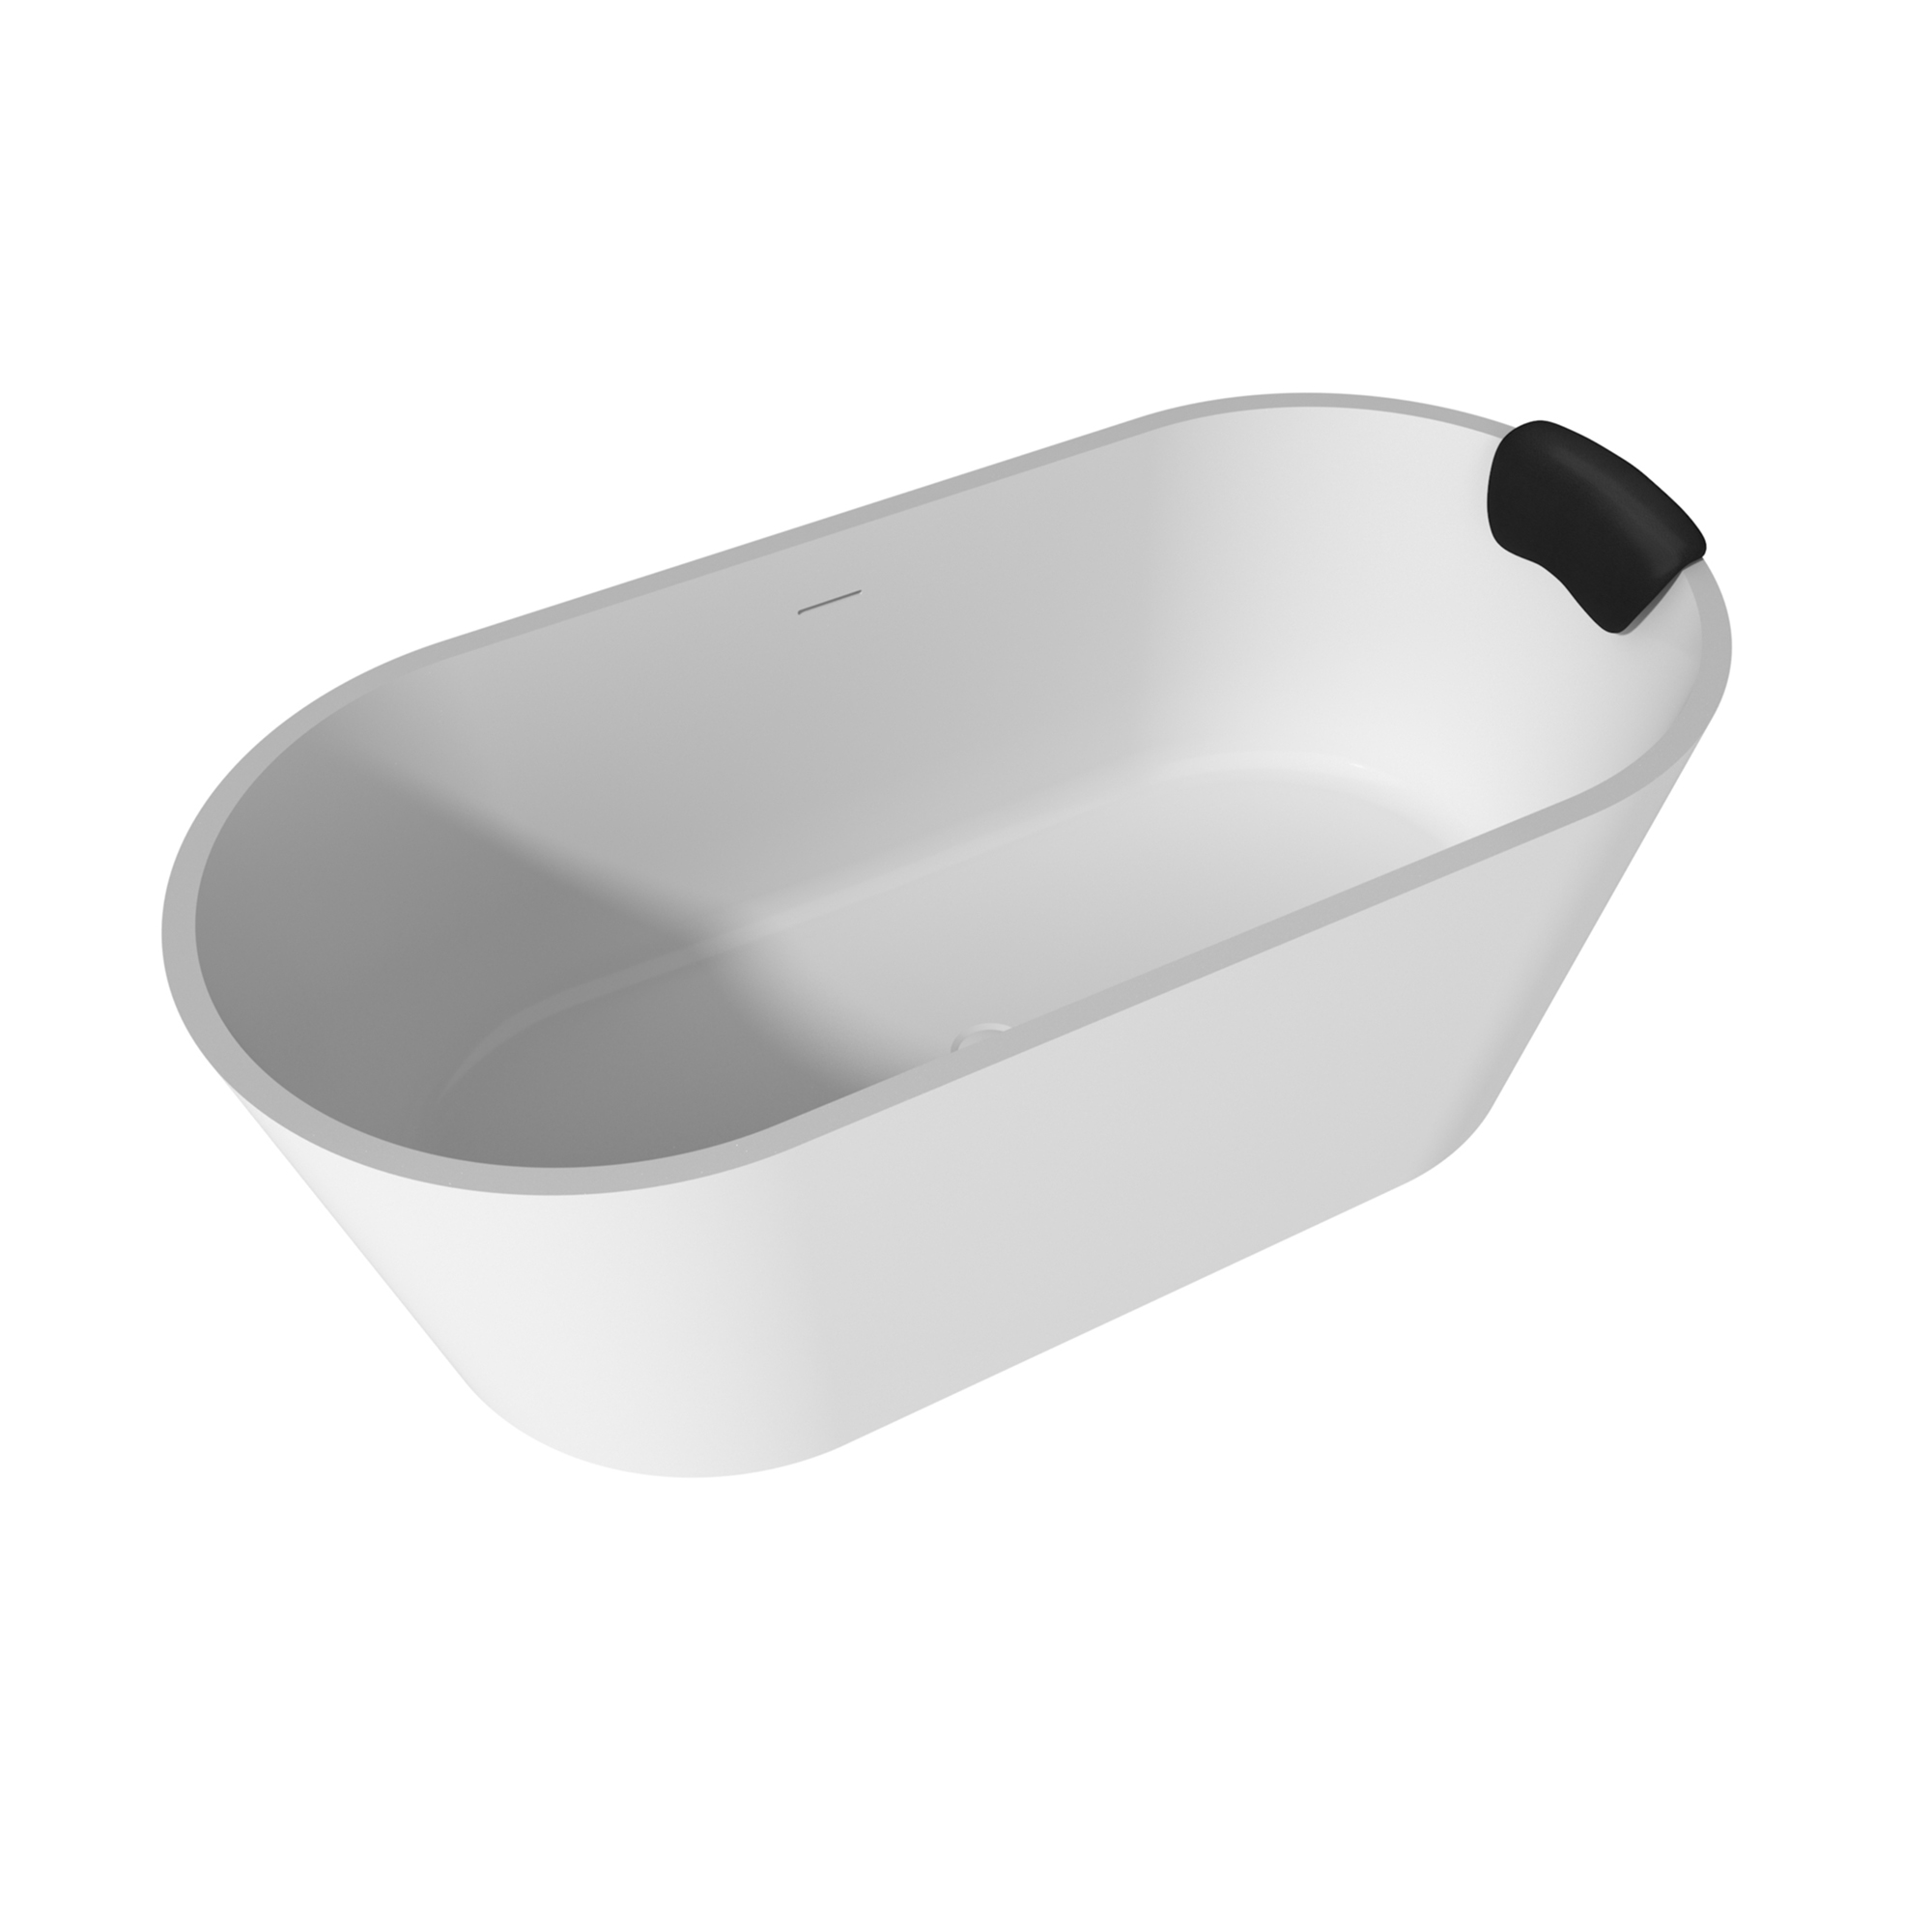 CASAINC 59/67" Matte White Solid Surface Adult Freestanding Soaking Tub with Cushions, Contemporary Designs for Resin Bathtubs, 